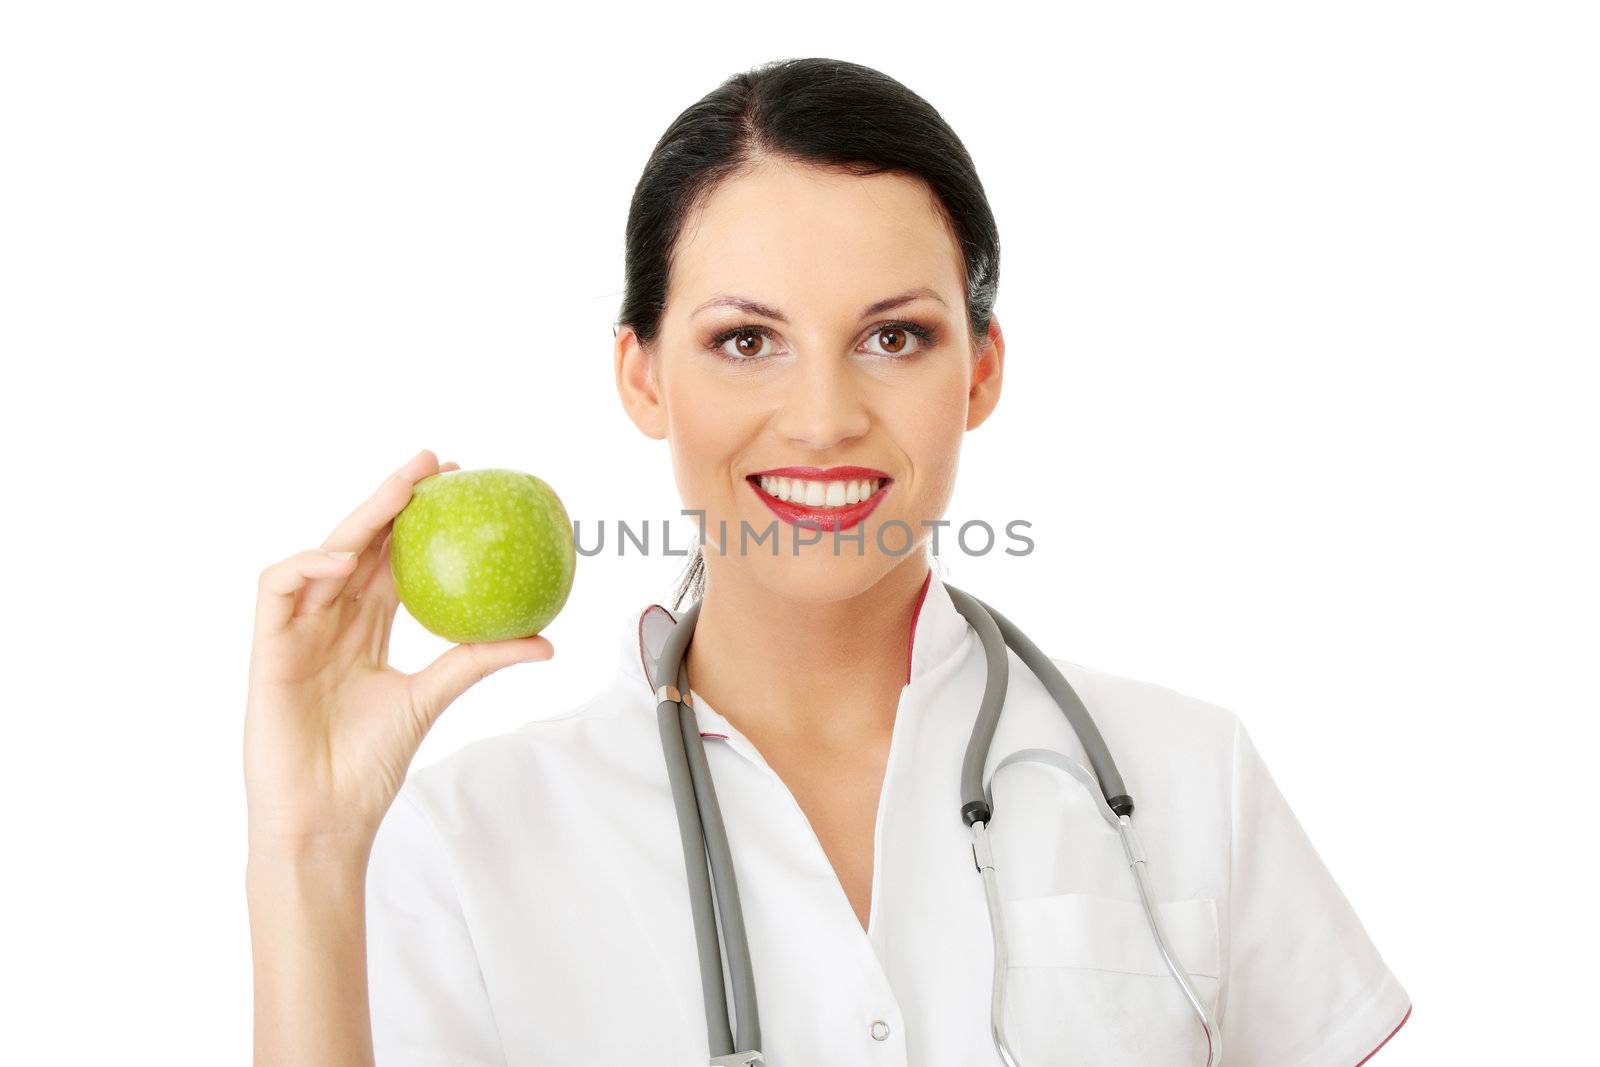 Healthy eating or lifestyle concept. Smiling woman doctor with a green apple.